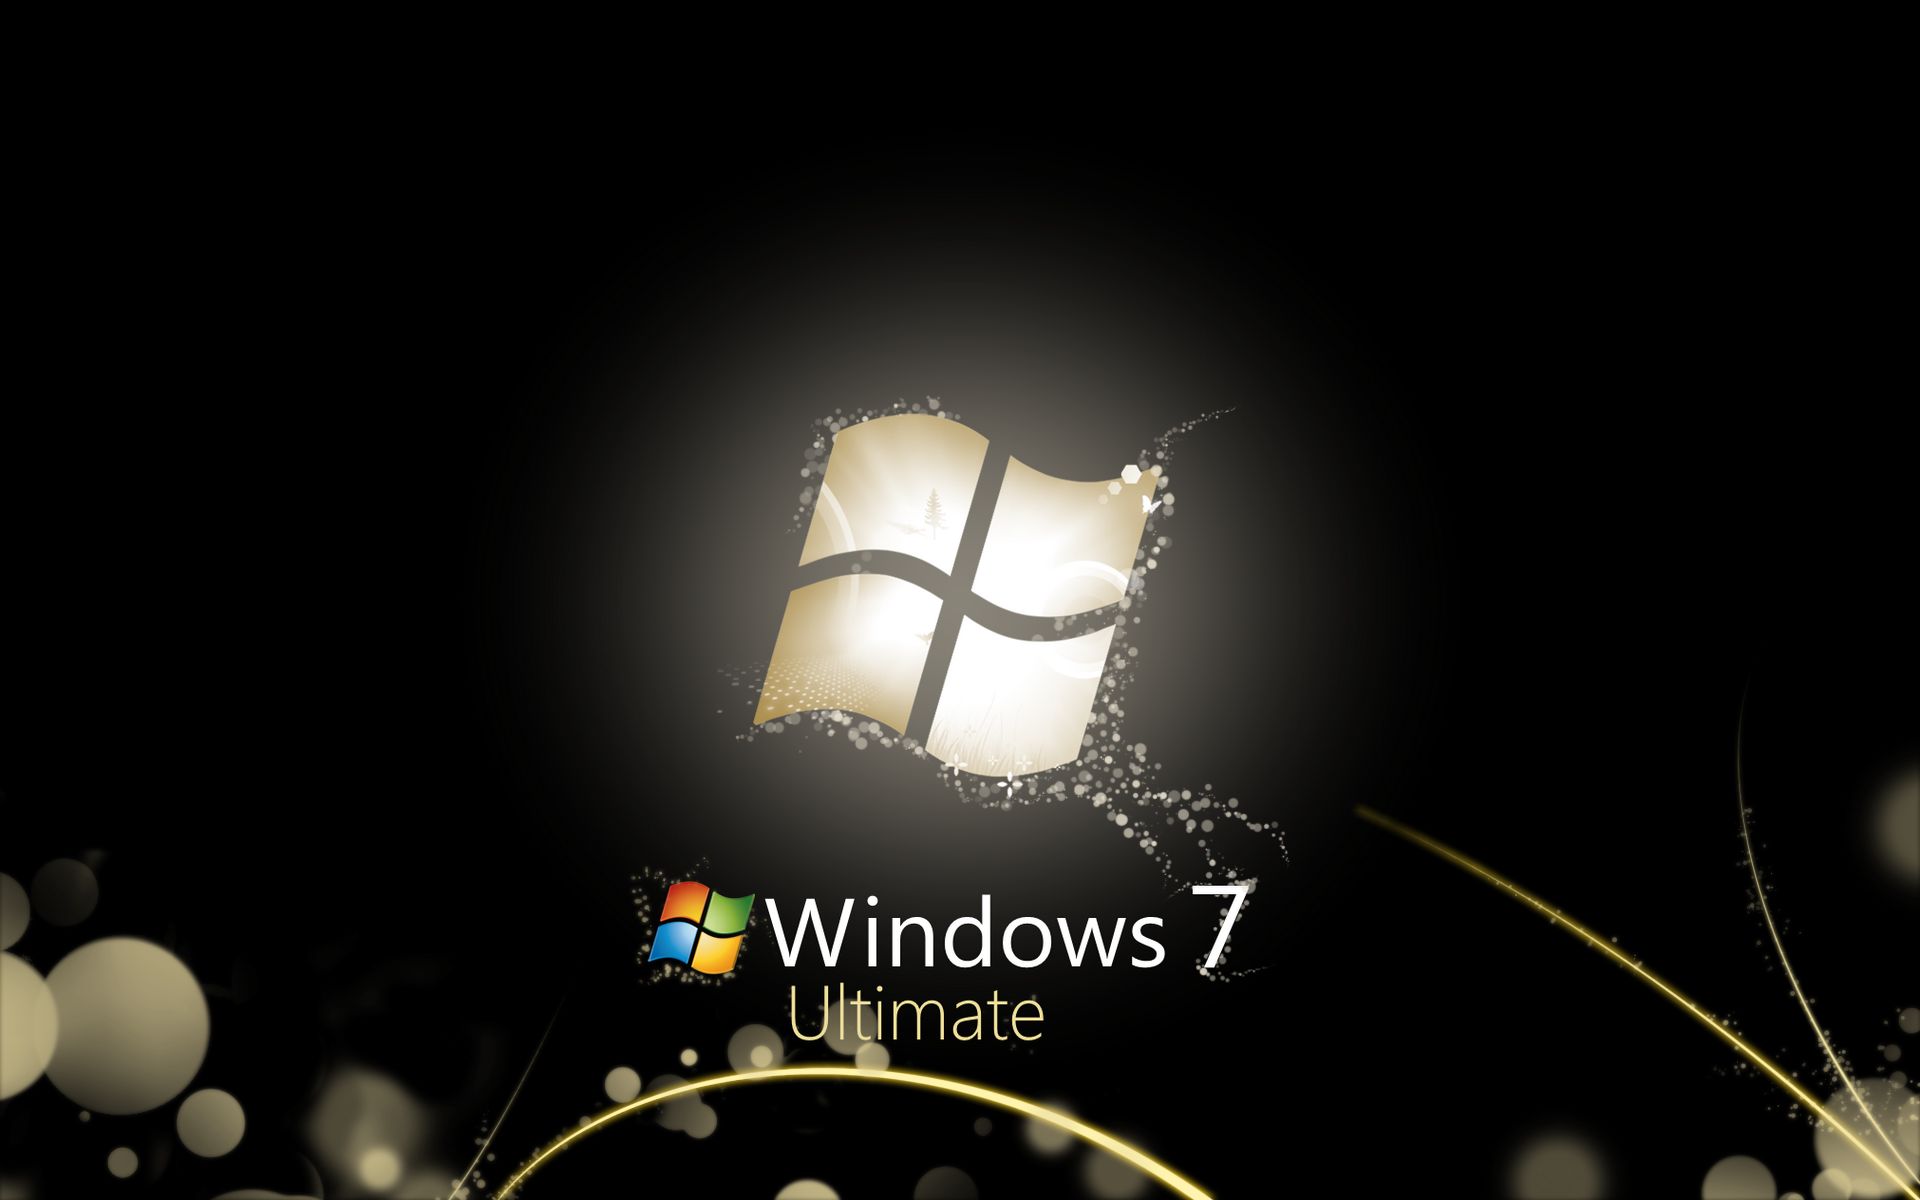 windows ultimate, windows, windows 7, microsoft, technology, windows 7 ultimate wallpapers for tablet